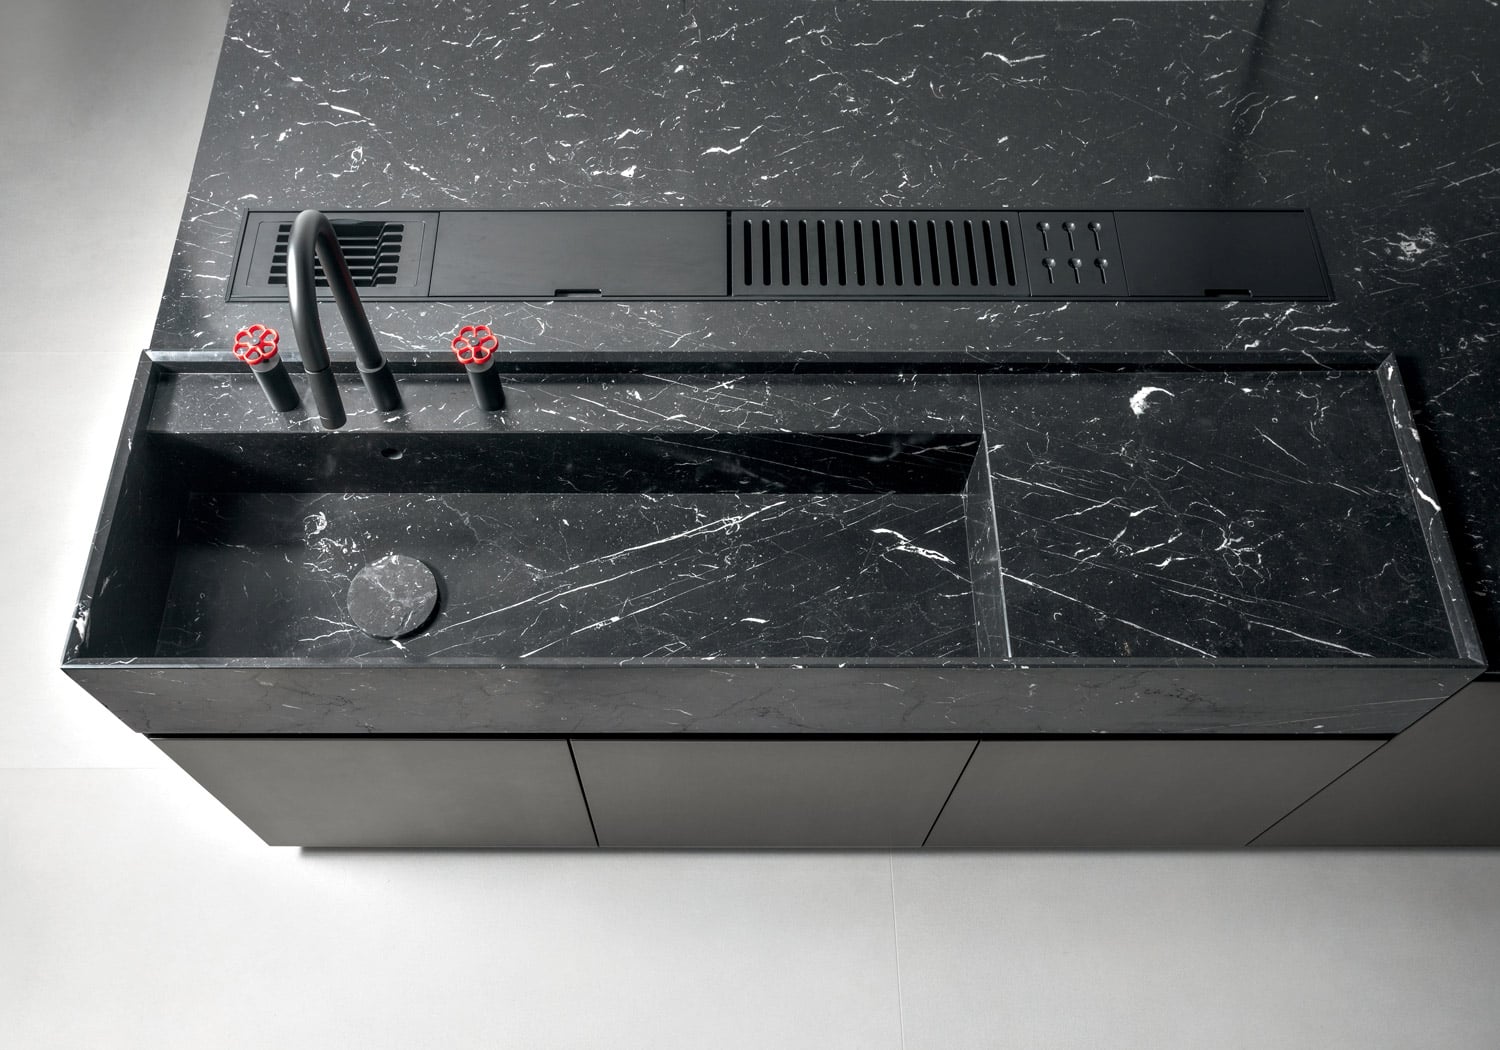 Even if made in the same material, sink and countertop are designed to be two distinct areas of the kitchen island. In front of the sink, also integrated within the countertop, is a custom accessorized channel to store knives, dishes and more items. 